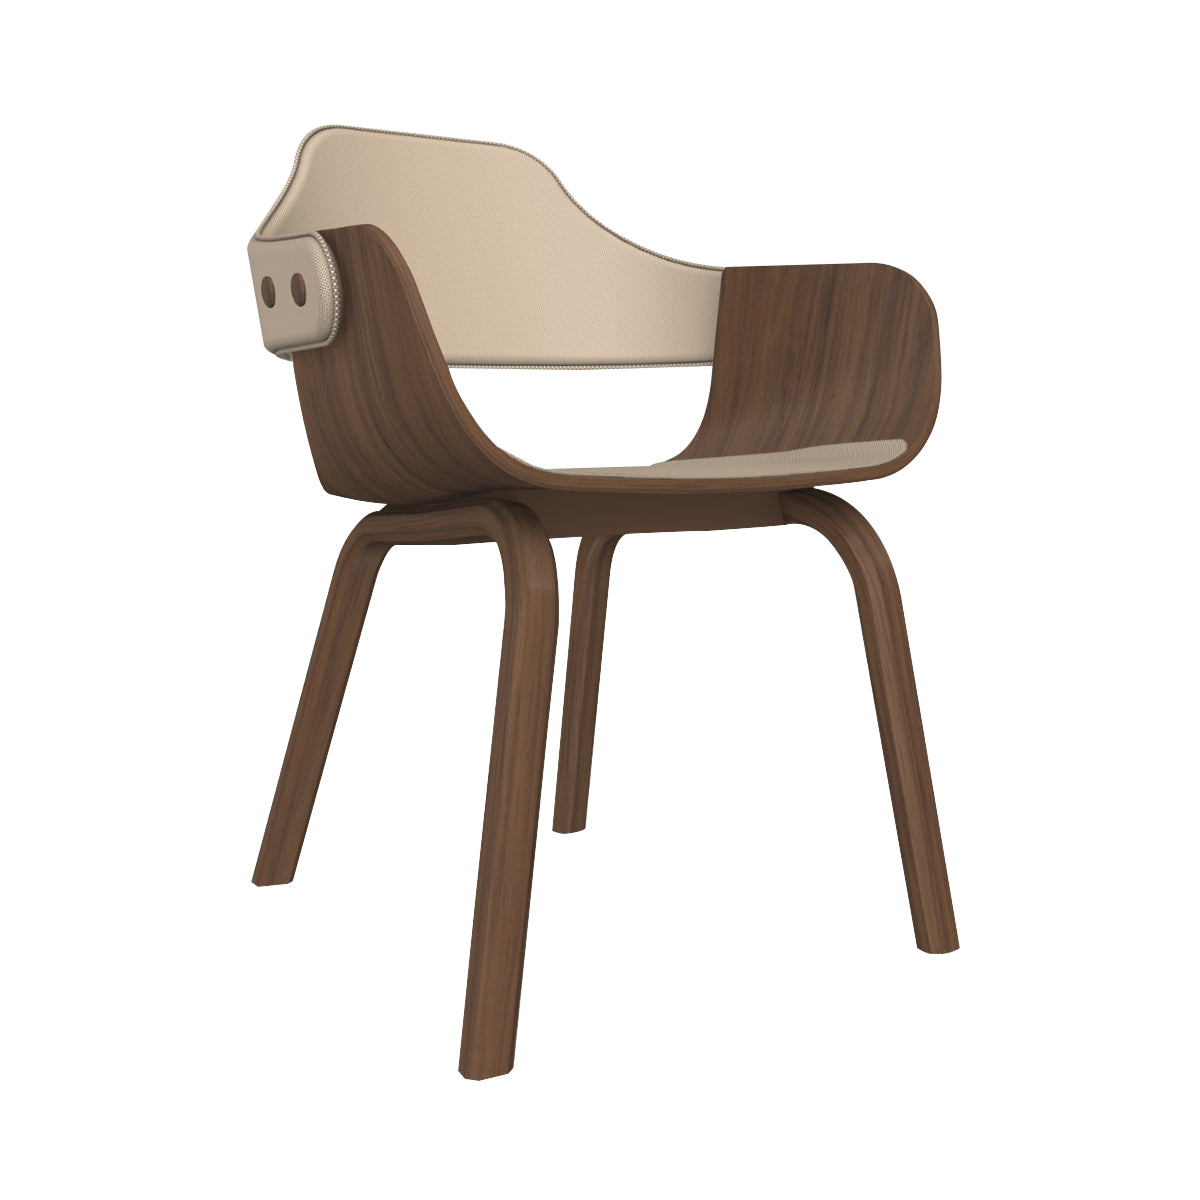 Showtime Chair: Seat + Backrest Upholstered + Walnut